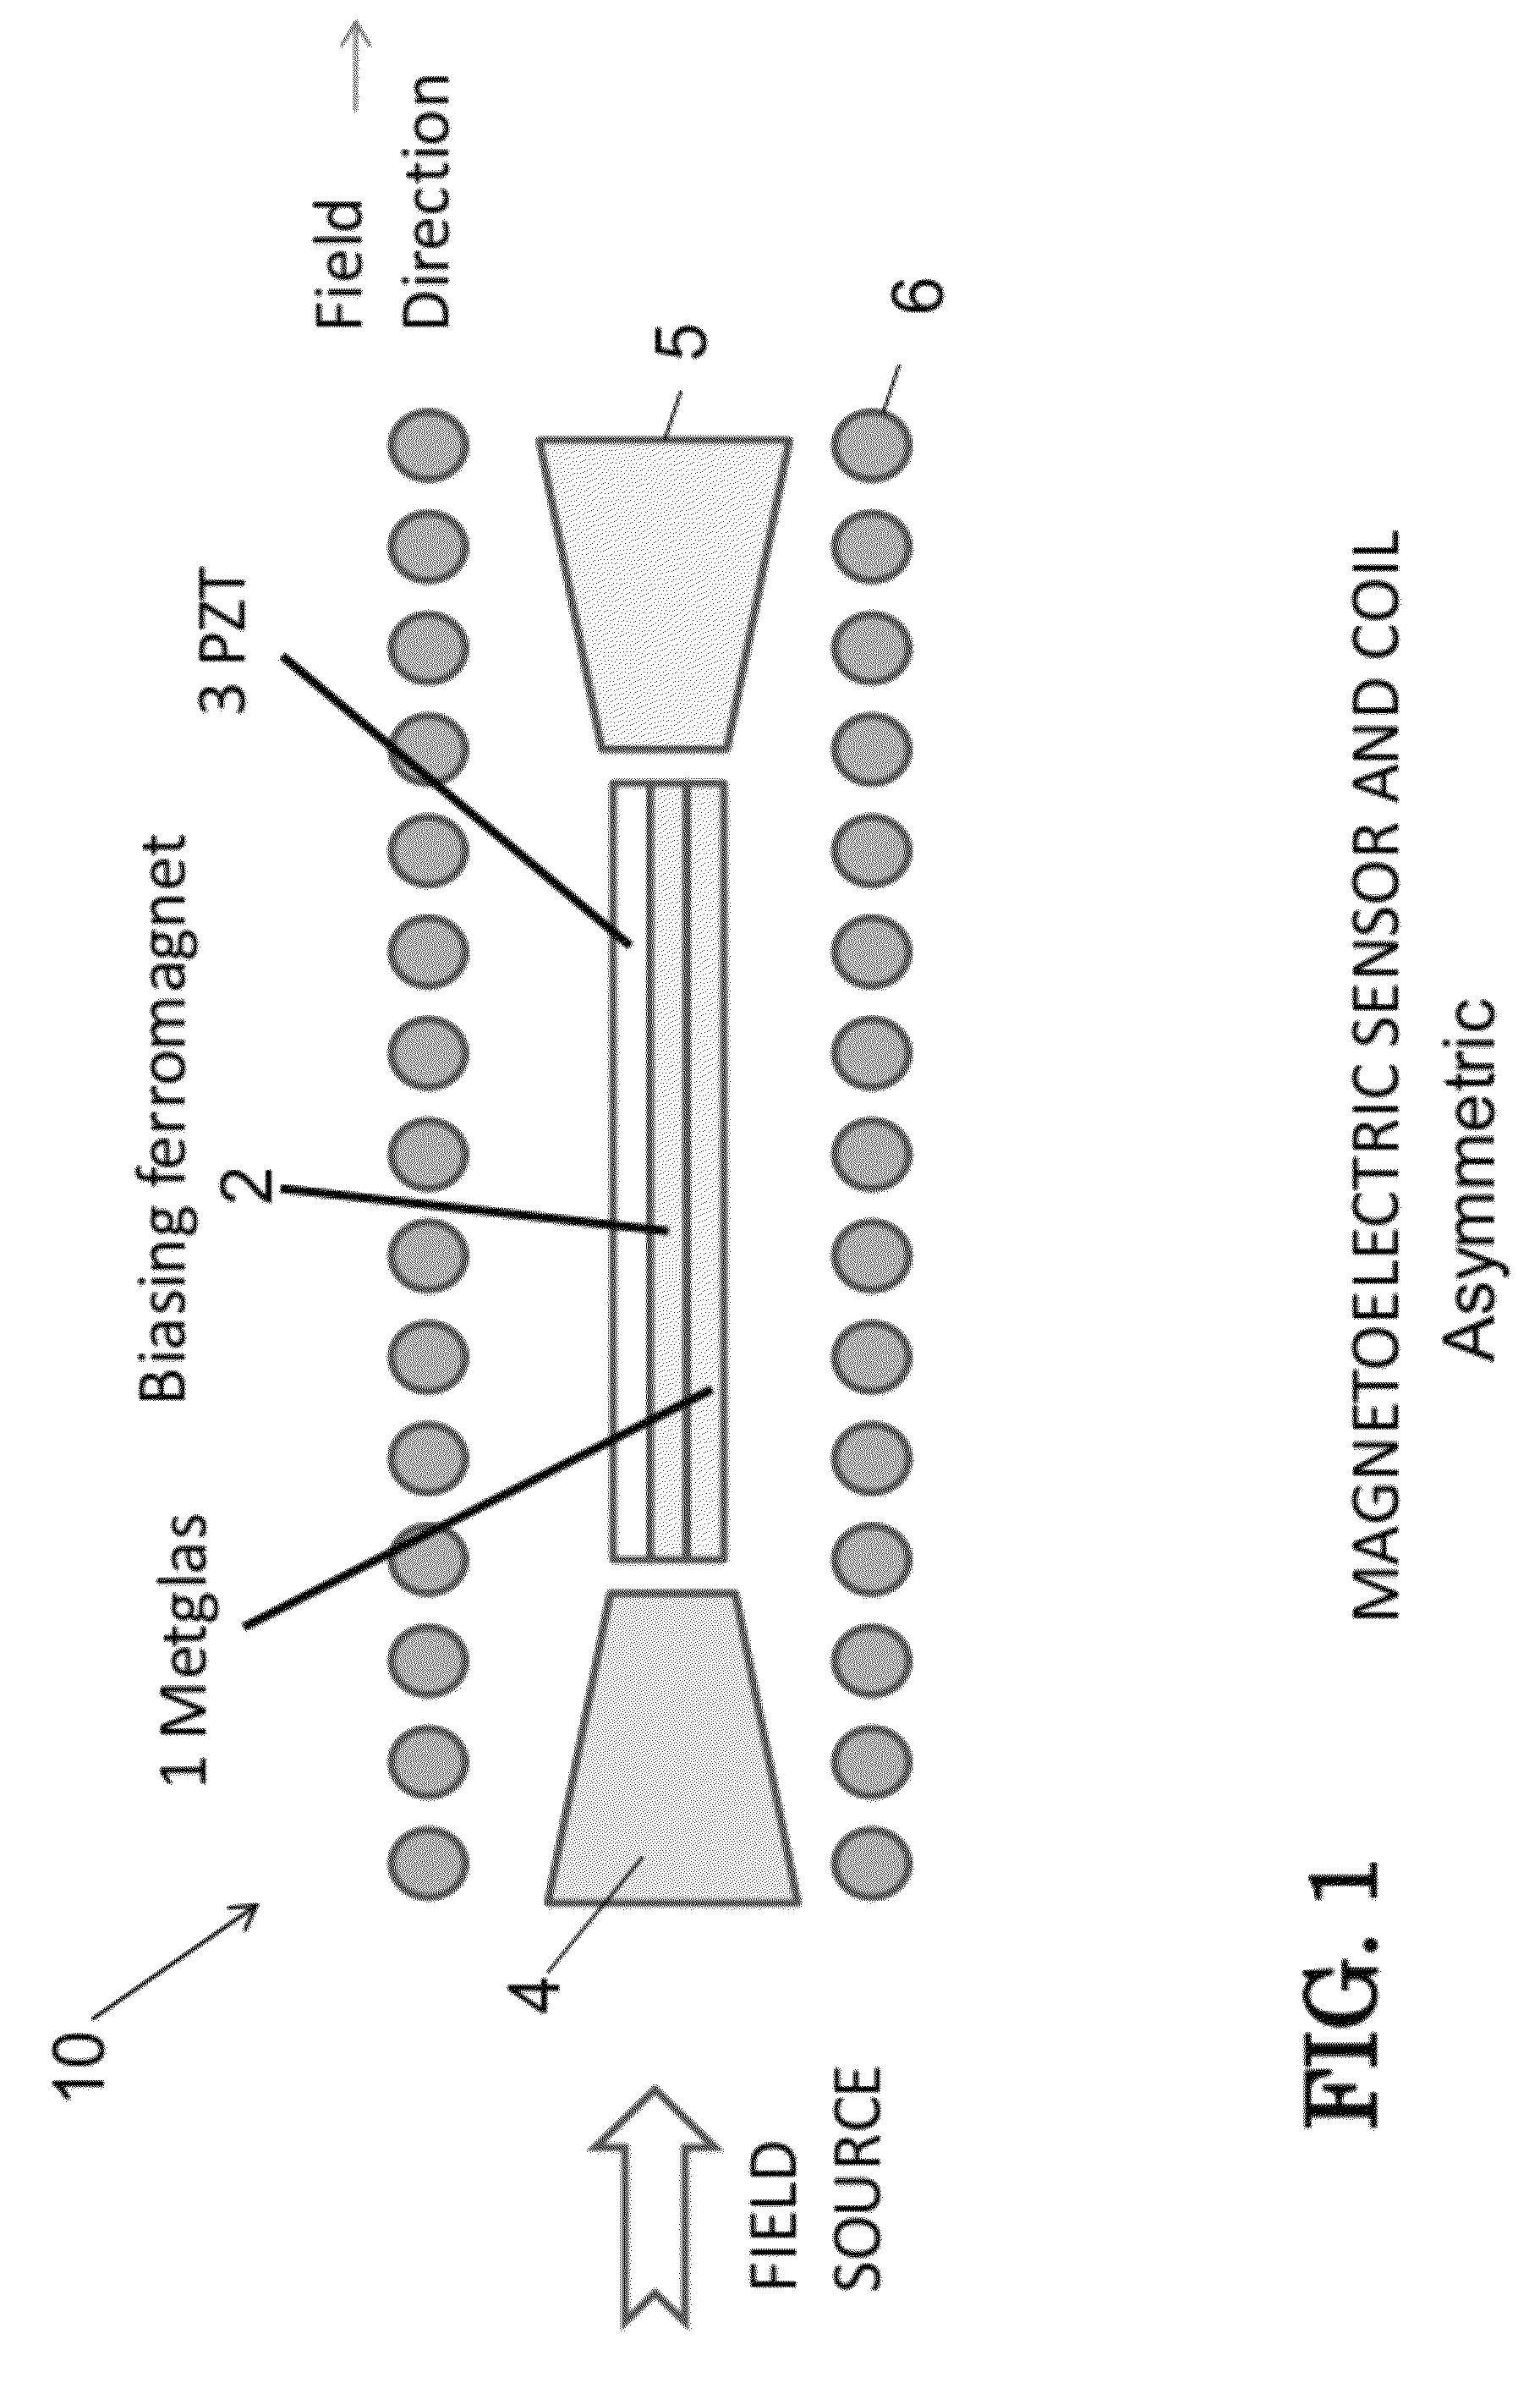 Method and apparatus for utilizing magnetic field modulation to increase the operating frequency of sensors